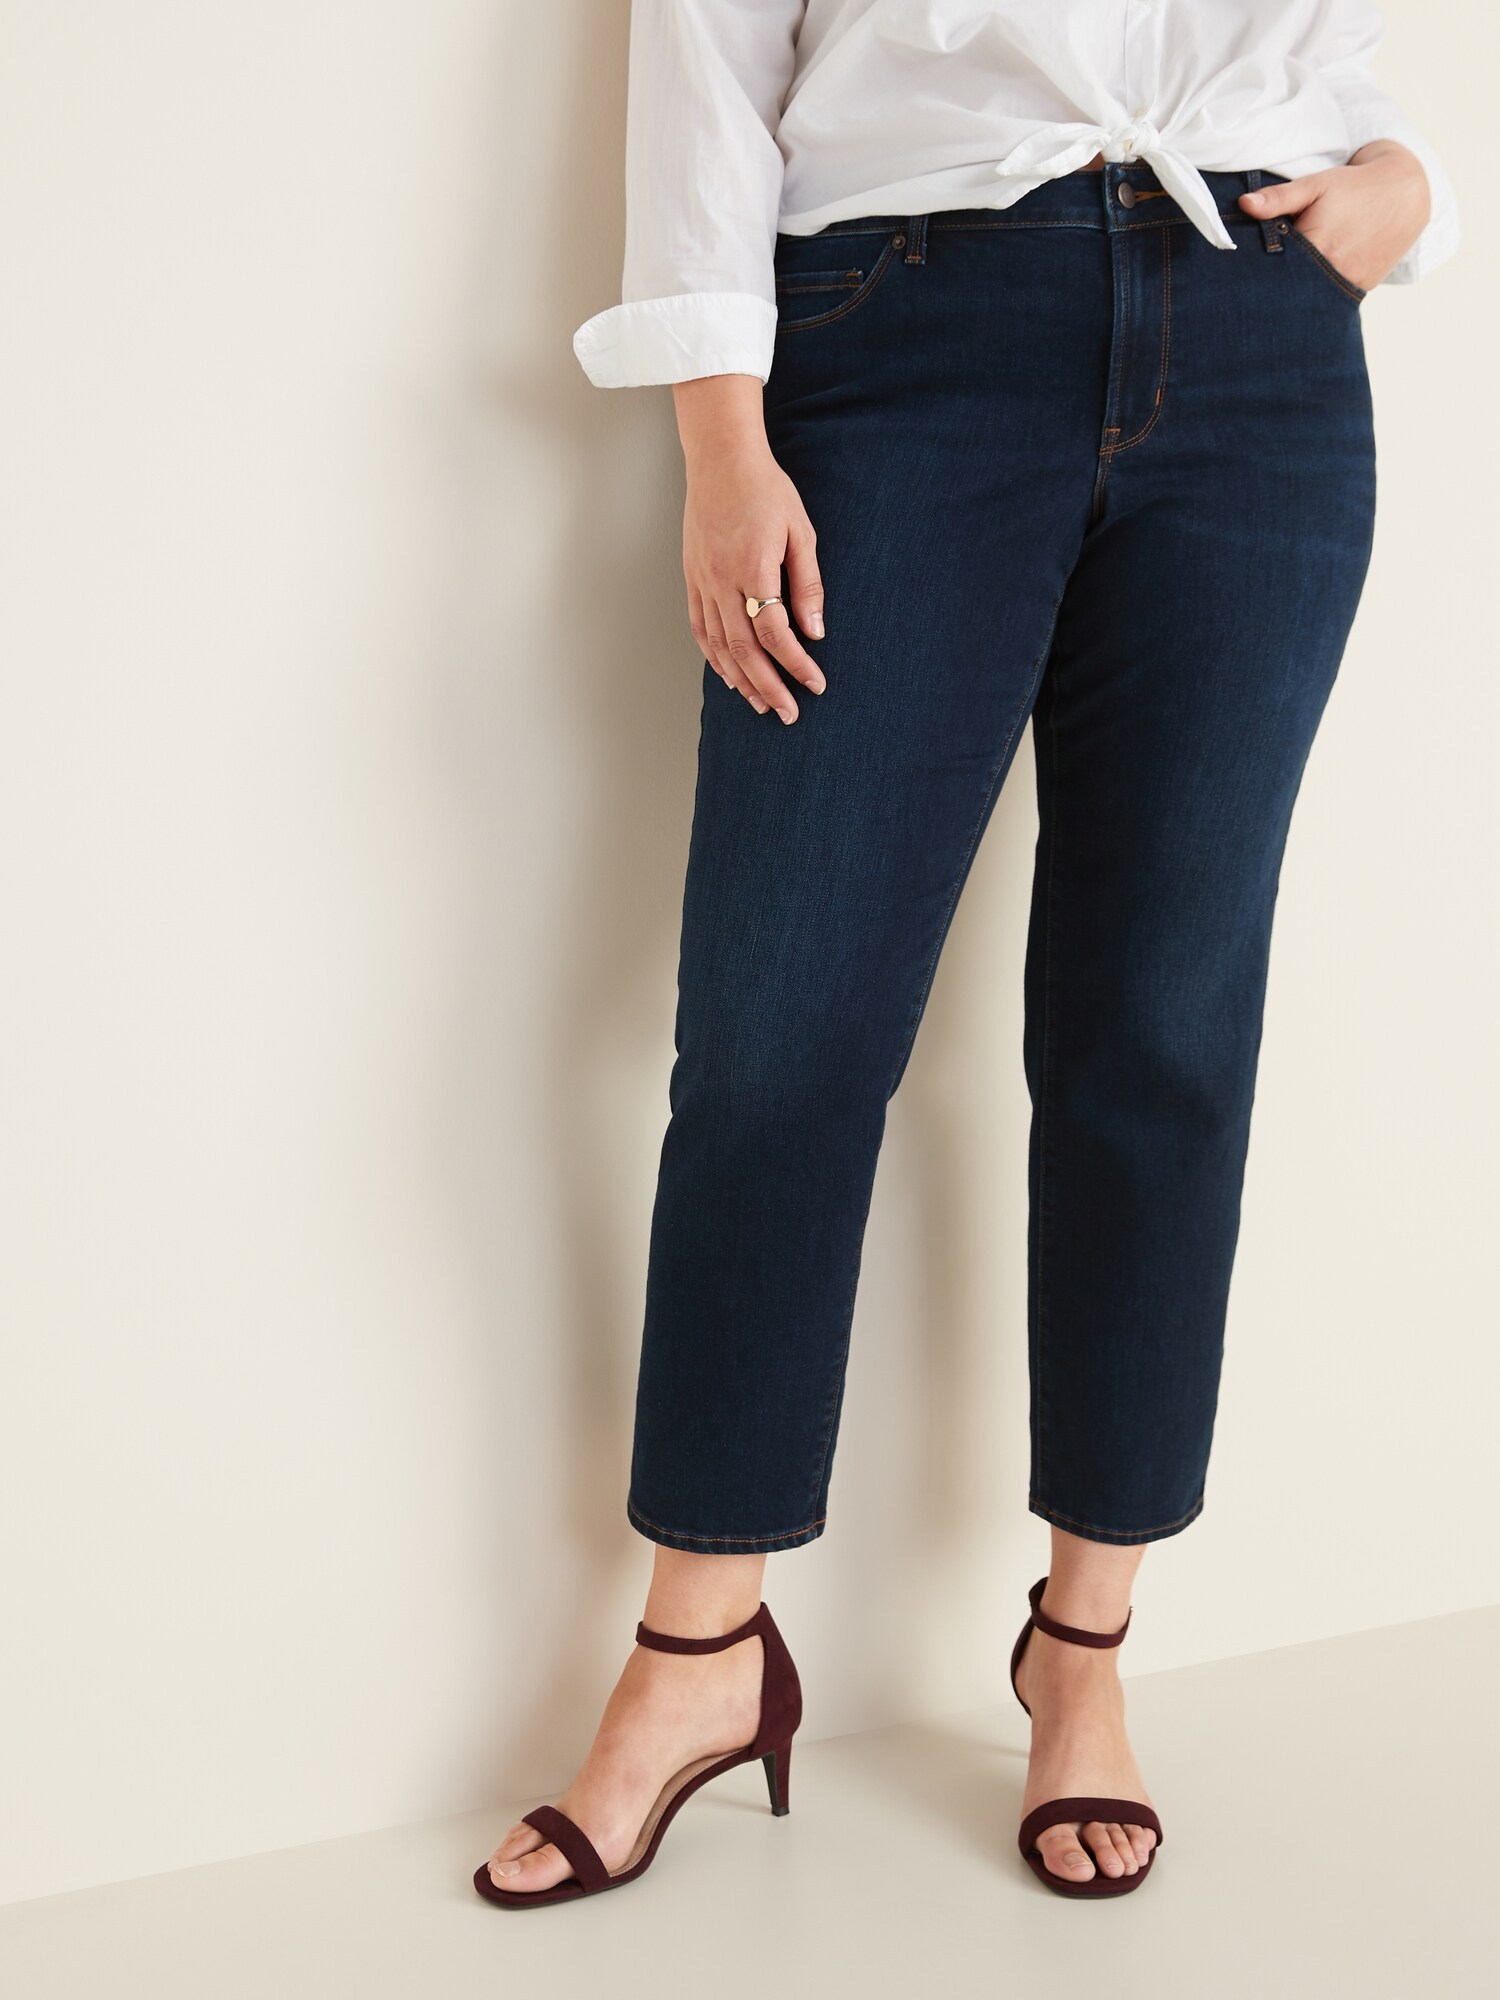 old navy mid rise curvy straight jeans